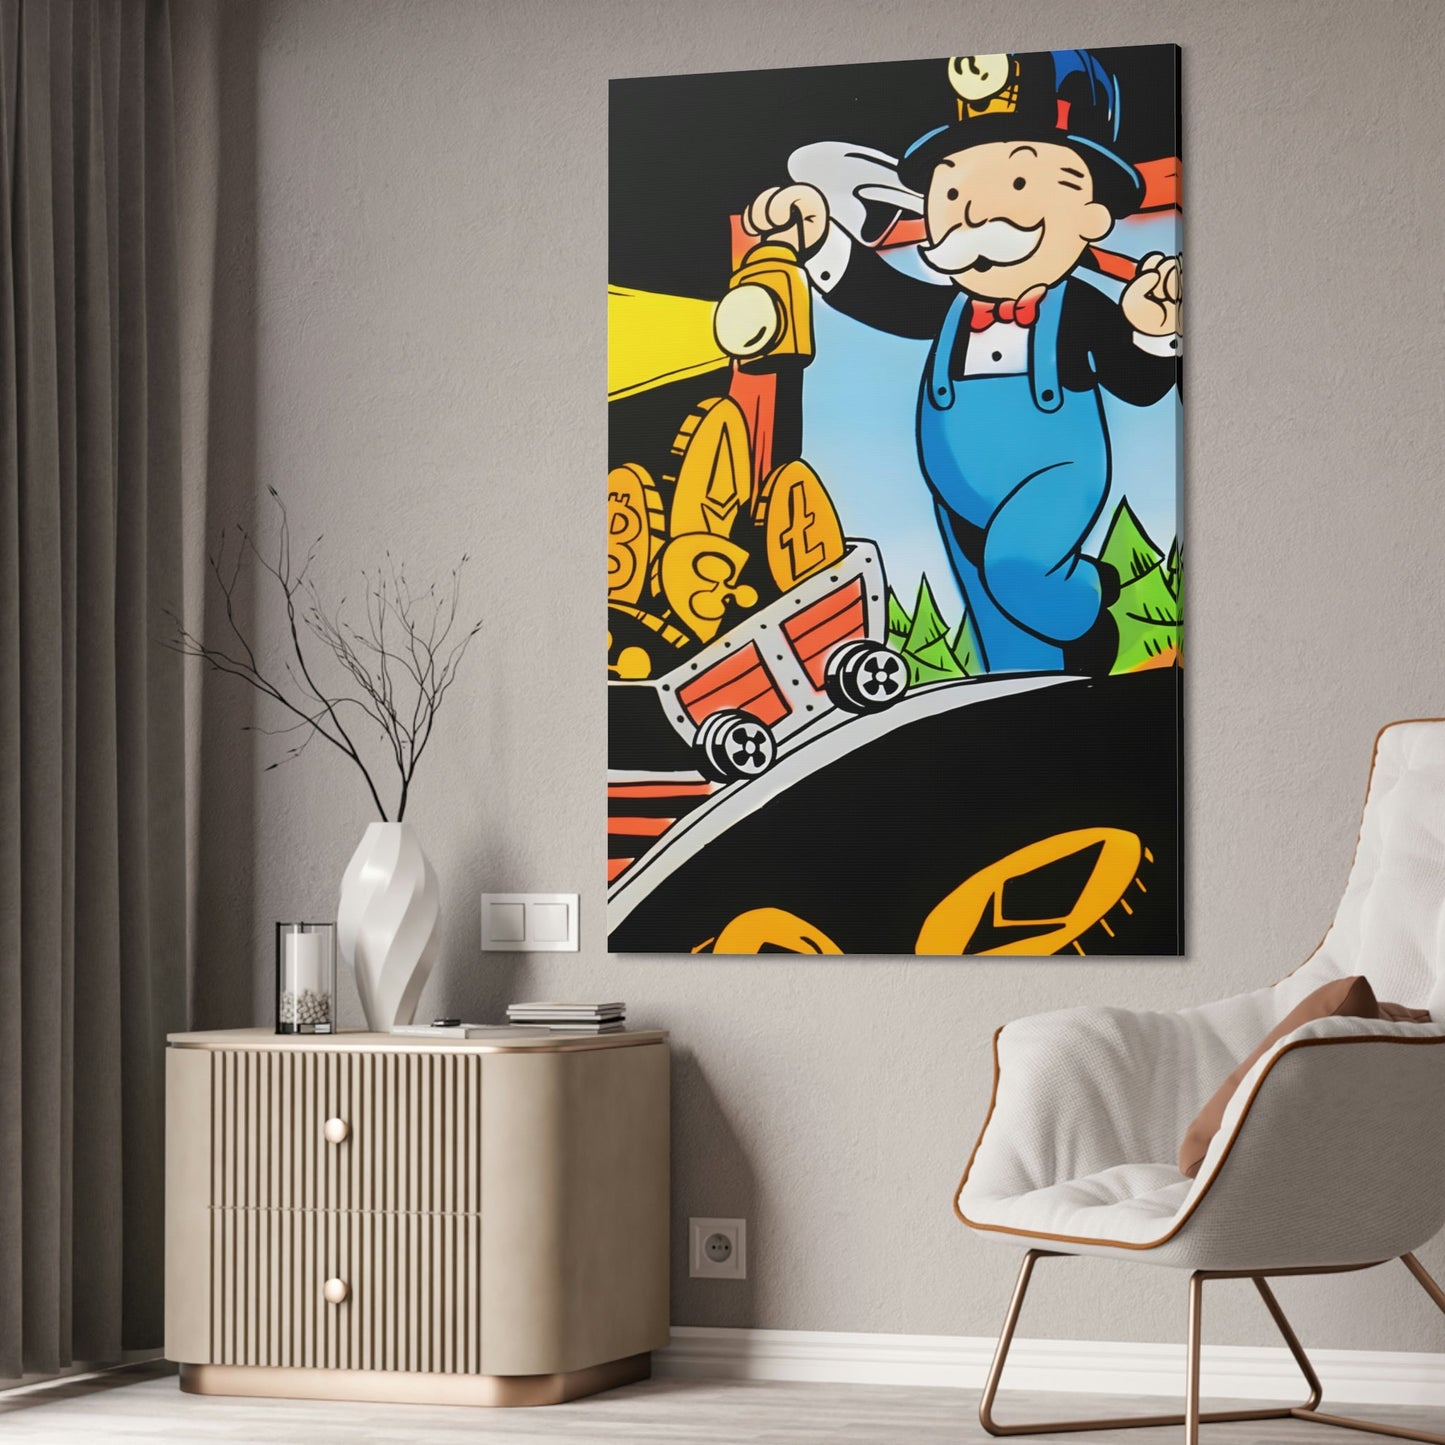 Making Money Moves: Alec Monopoly's Money-Themed Art in Poster and Canvas